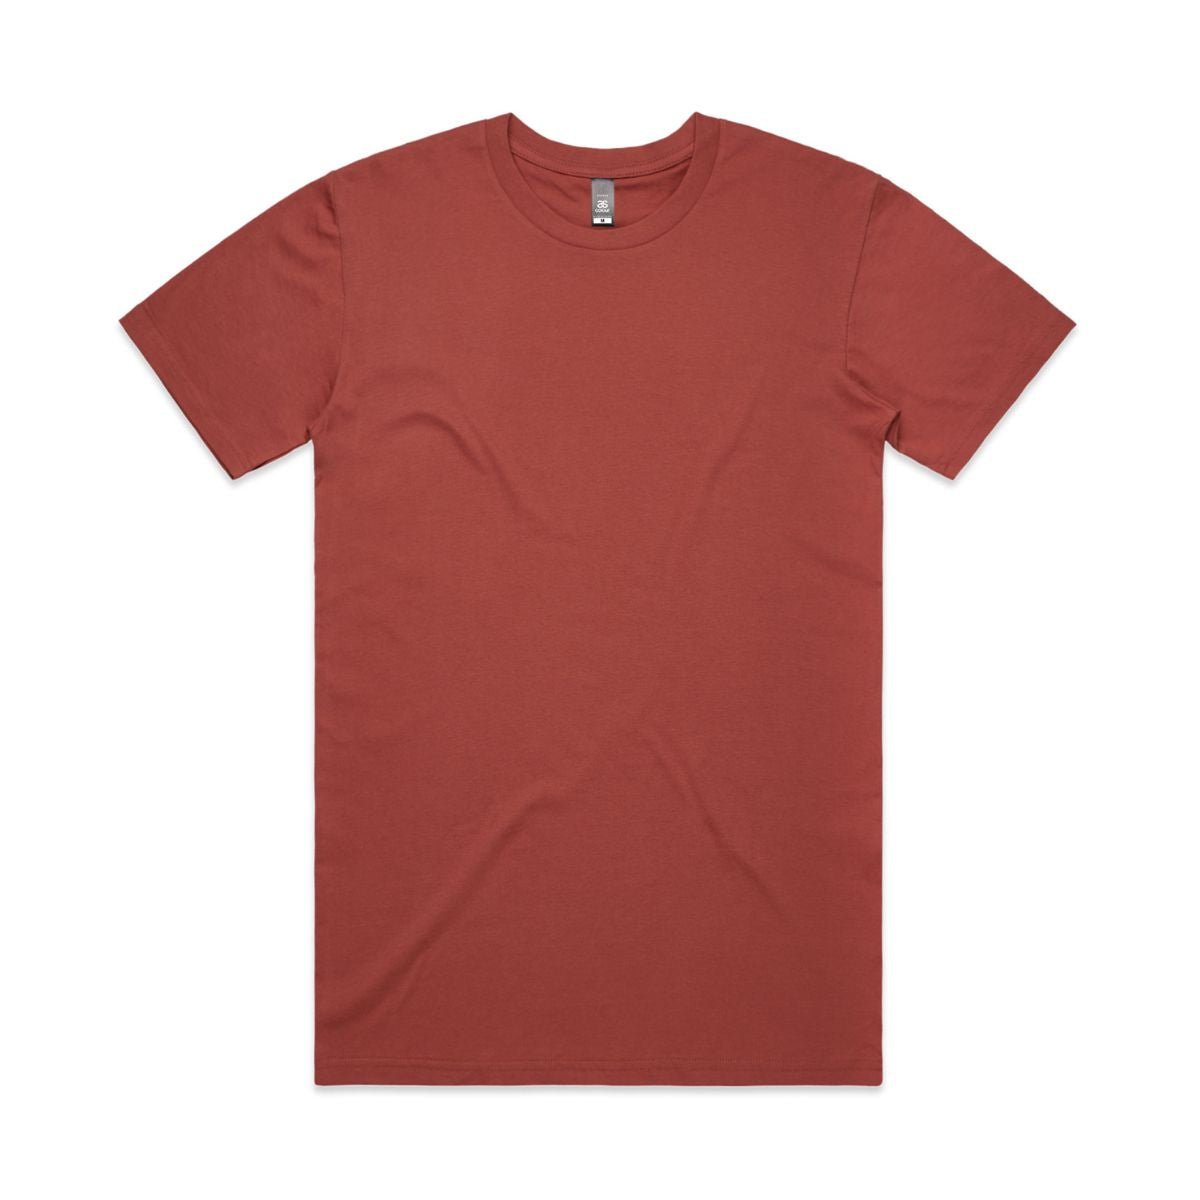 ascolour Men's Staple Tee - Red and Pink Shades 5001